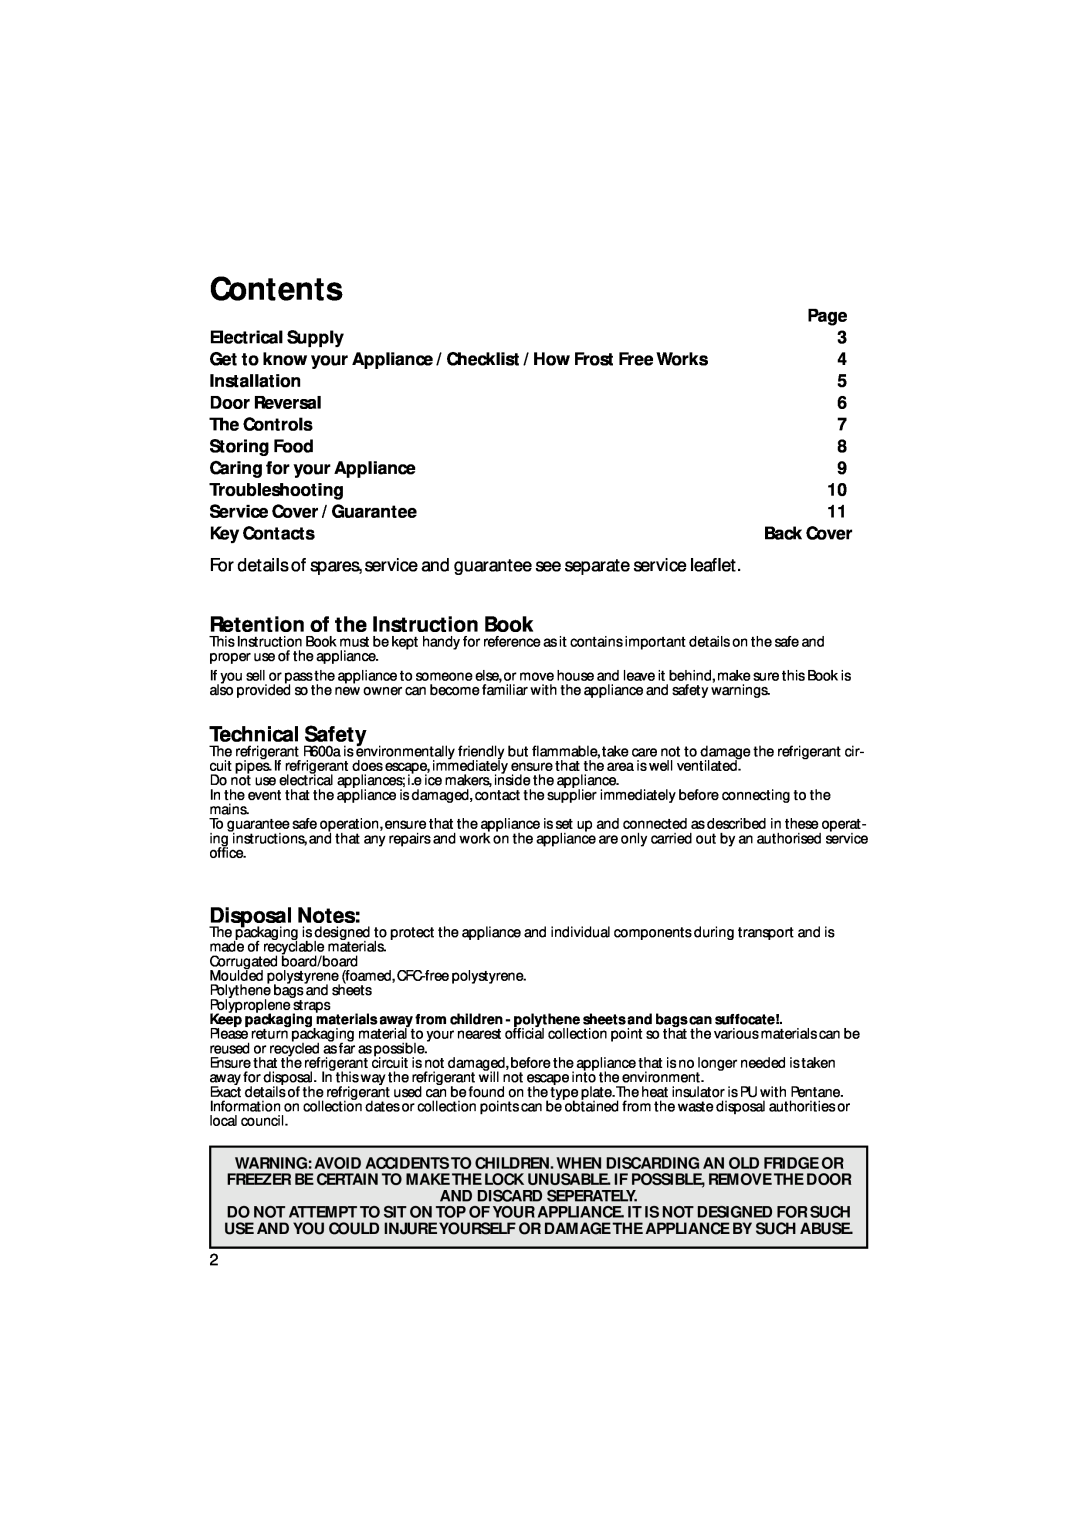 Hotpoint FZ92P manual Contents, Retention of the Instruction Book, Technical Safety, Disposal Notes 